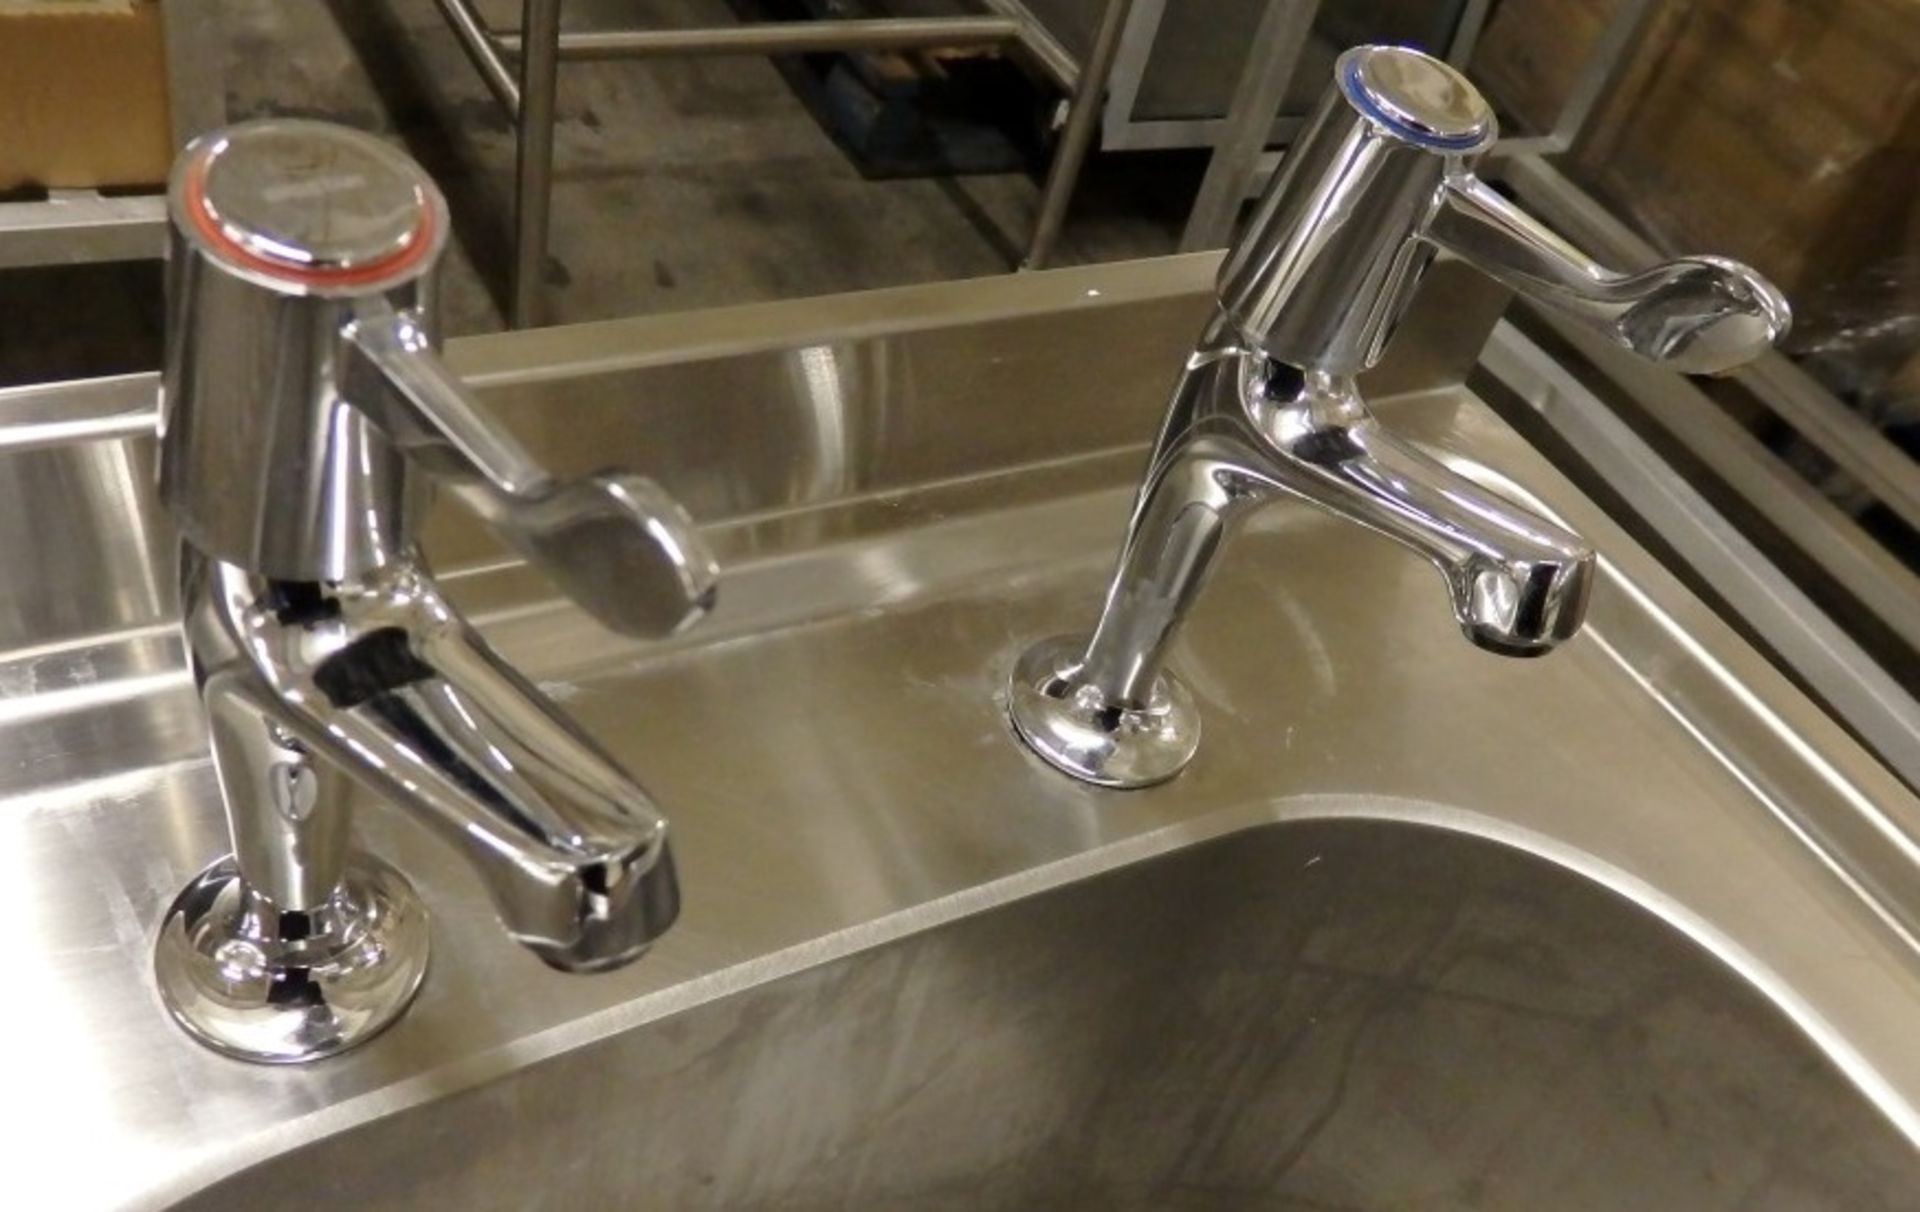 1 x Freestanding Commercial Stainless Steel Sink Unit - Dimensions: W120 x D60 x H92cm - Ref: BCE052 - Image 3 of 8